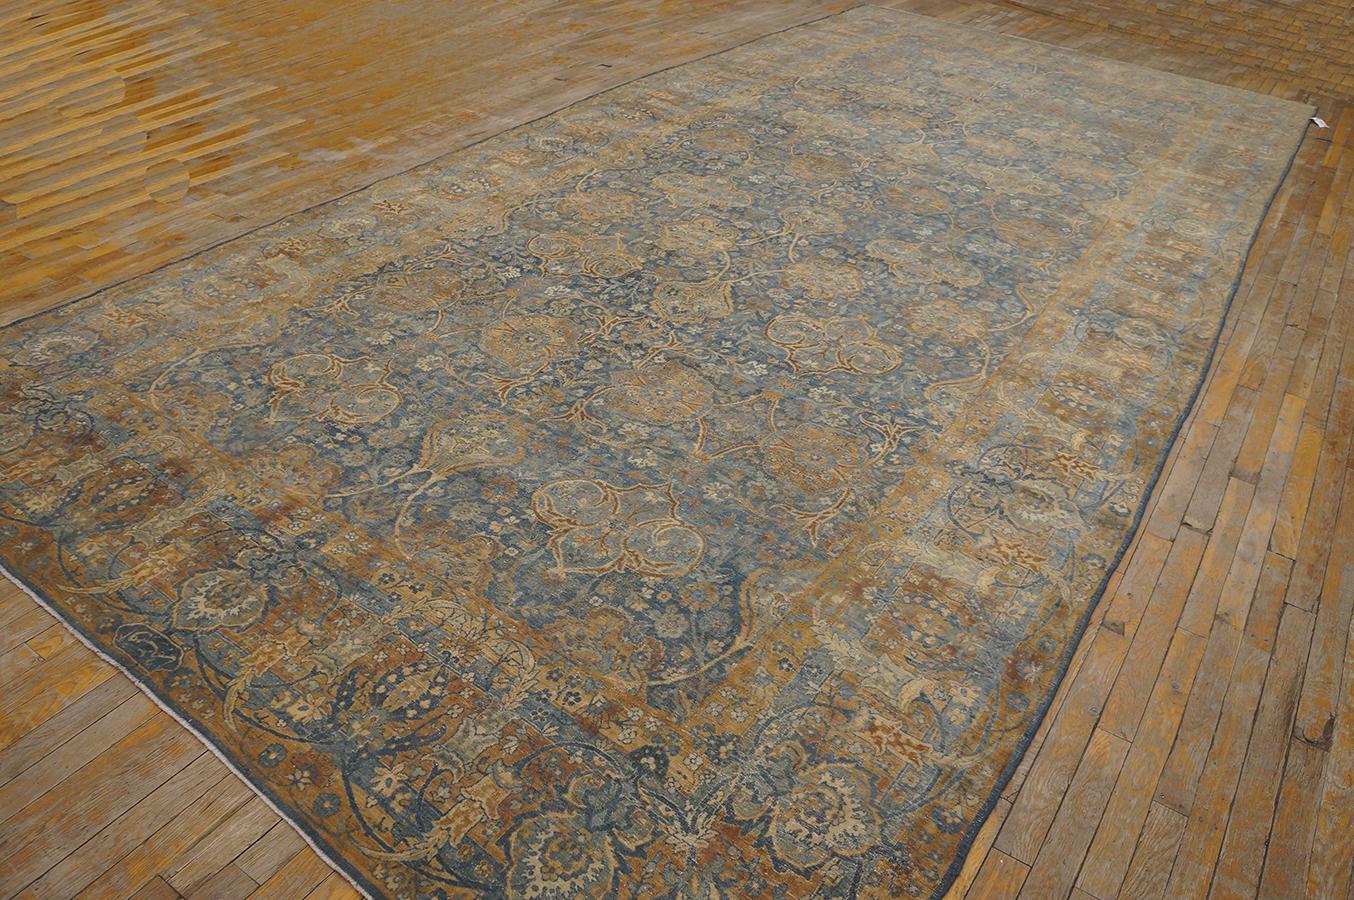 Hand-Knotted 1920s Persian Kerman Carpet Produced By OCM ( 8' x 17'6